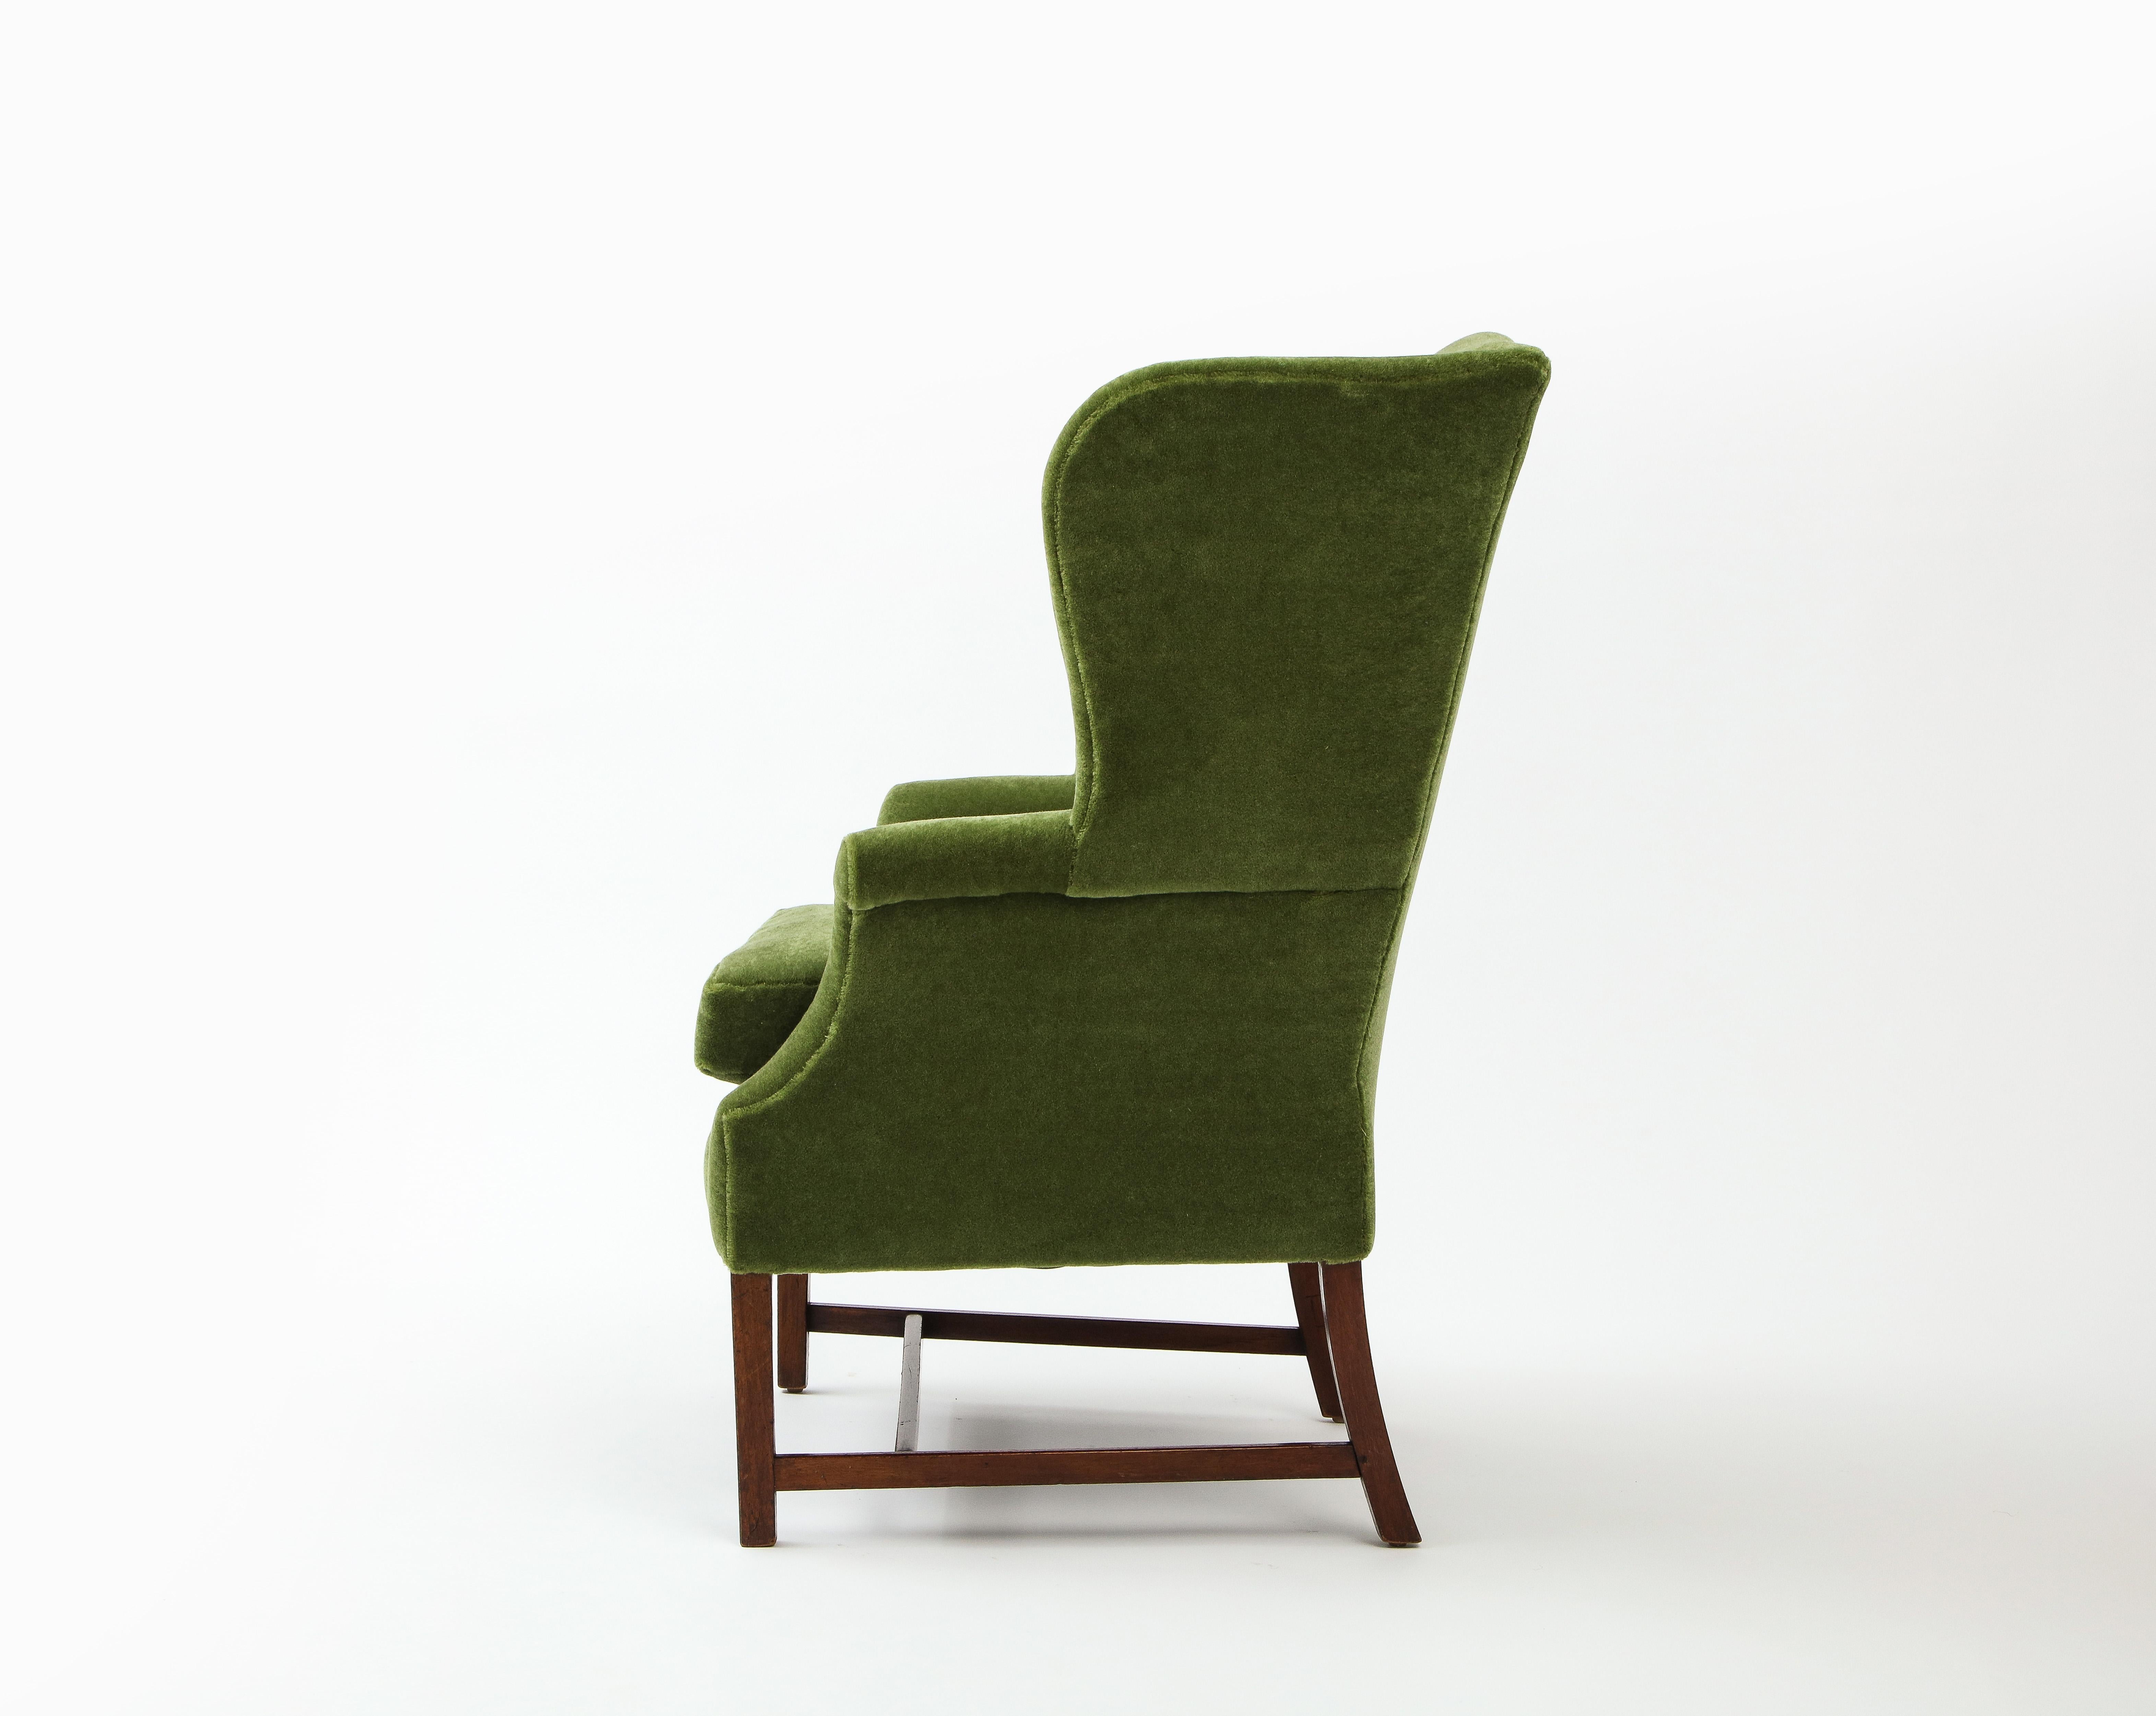 Wingback Library Chair in Green Pierre Frey Mohair, England late 19th Century 1